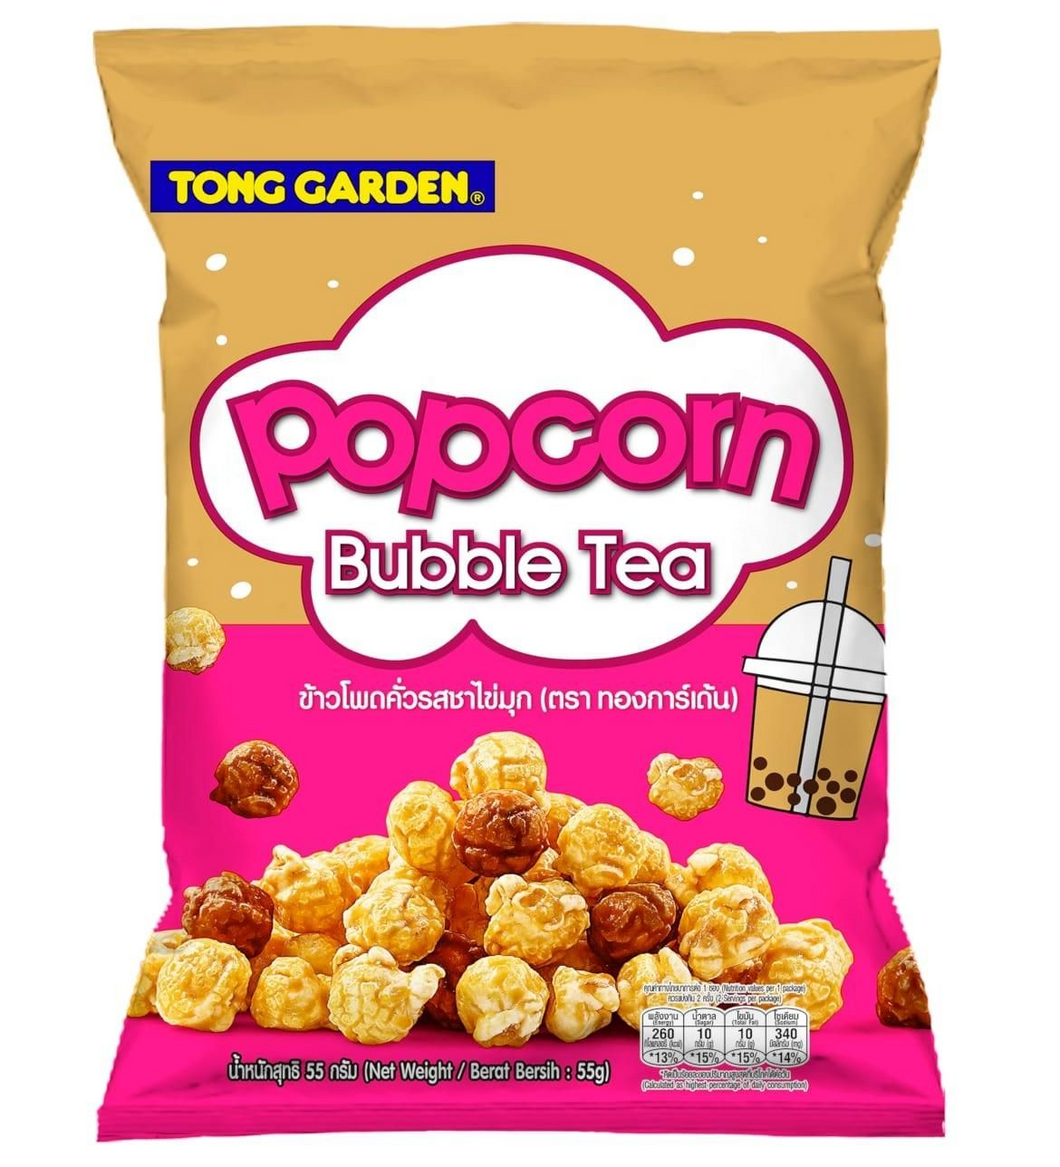 Other Local Snacks (Halal): 55g Tong Garden Popcorn Cheese, Caramel, Bubble Tea or Hot & Spicy Flavour